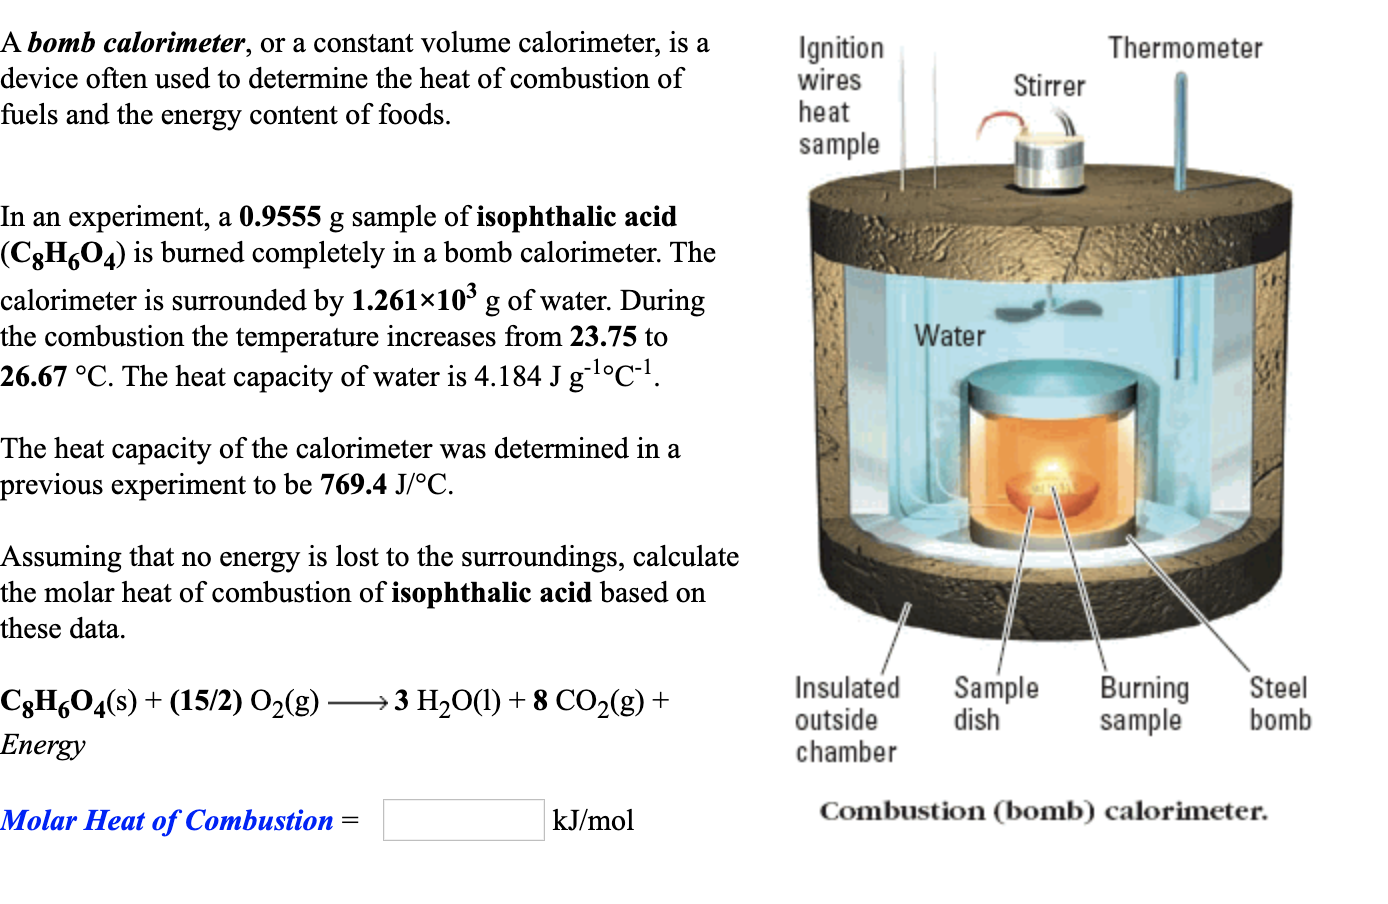 A bomb calorimeter, or a constant volume calorimeter, is a
Ignition
wires
heat
Thermometer
device often used to determine the heat of combustion of
Stirrer
fuels and the energy content of foods.
sample
In an experiment, a 0.9555 g sample of isophthalic acid
(C3H,04) is burned completely in a bomb calorimeter. The
calorimeter is surrounded by 1.261×10' g of water. During
the combustion the temperature increases from 23.75 to
26.67 °C. The heat capacity of water is 4.184 J gl°C!.
Water
The heat capacity of the calorimeter was determined in a
previous experiment to be 769.4 J/°C.
Assuming that no energy is lost to the surroundings, calculate
the molar heat of combustion of isophthalic acid based on
these data.
Insulated
Sample
dish
Burning
sample
Steel
bomb
C3H¿O4(s) + (15/2) O2(g)
3 H2O(1) + 8 CO2(g) +
Energy
outside
chamber
Molar Heat of Combustion =
kJ/mol
Combustion (bomb) calorimeter.
